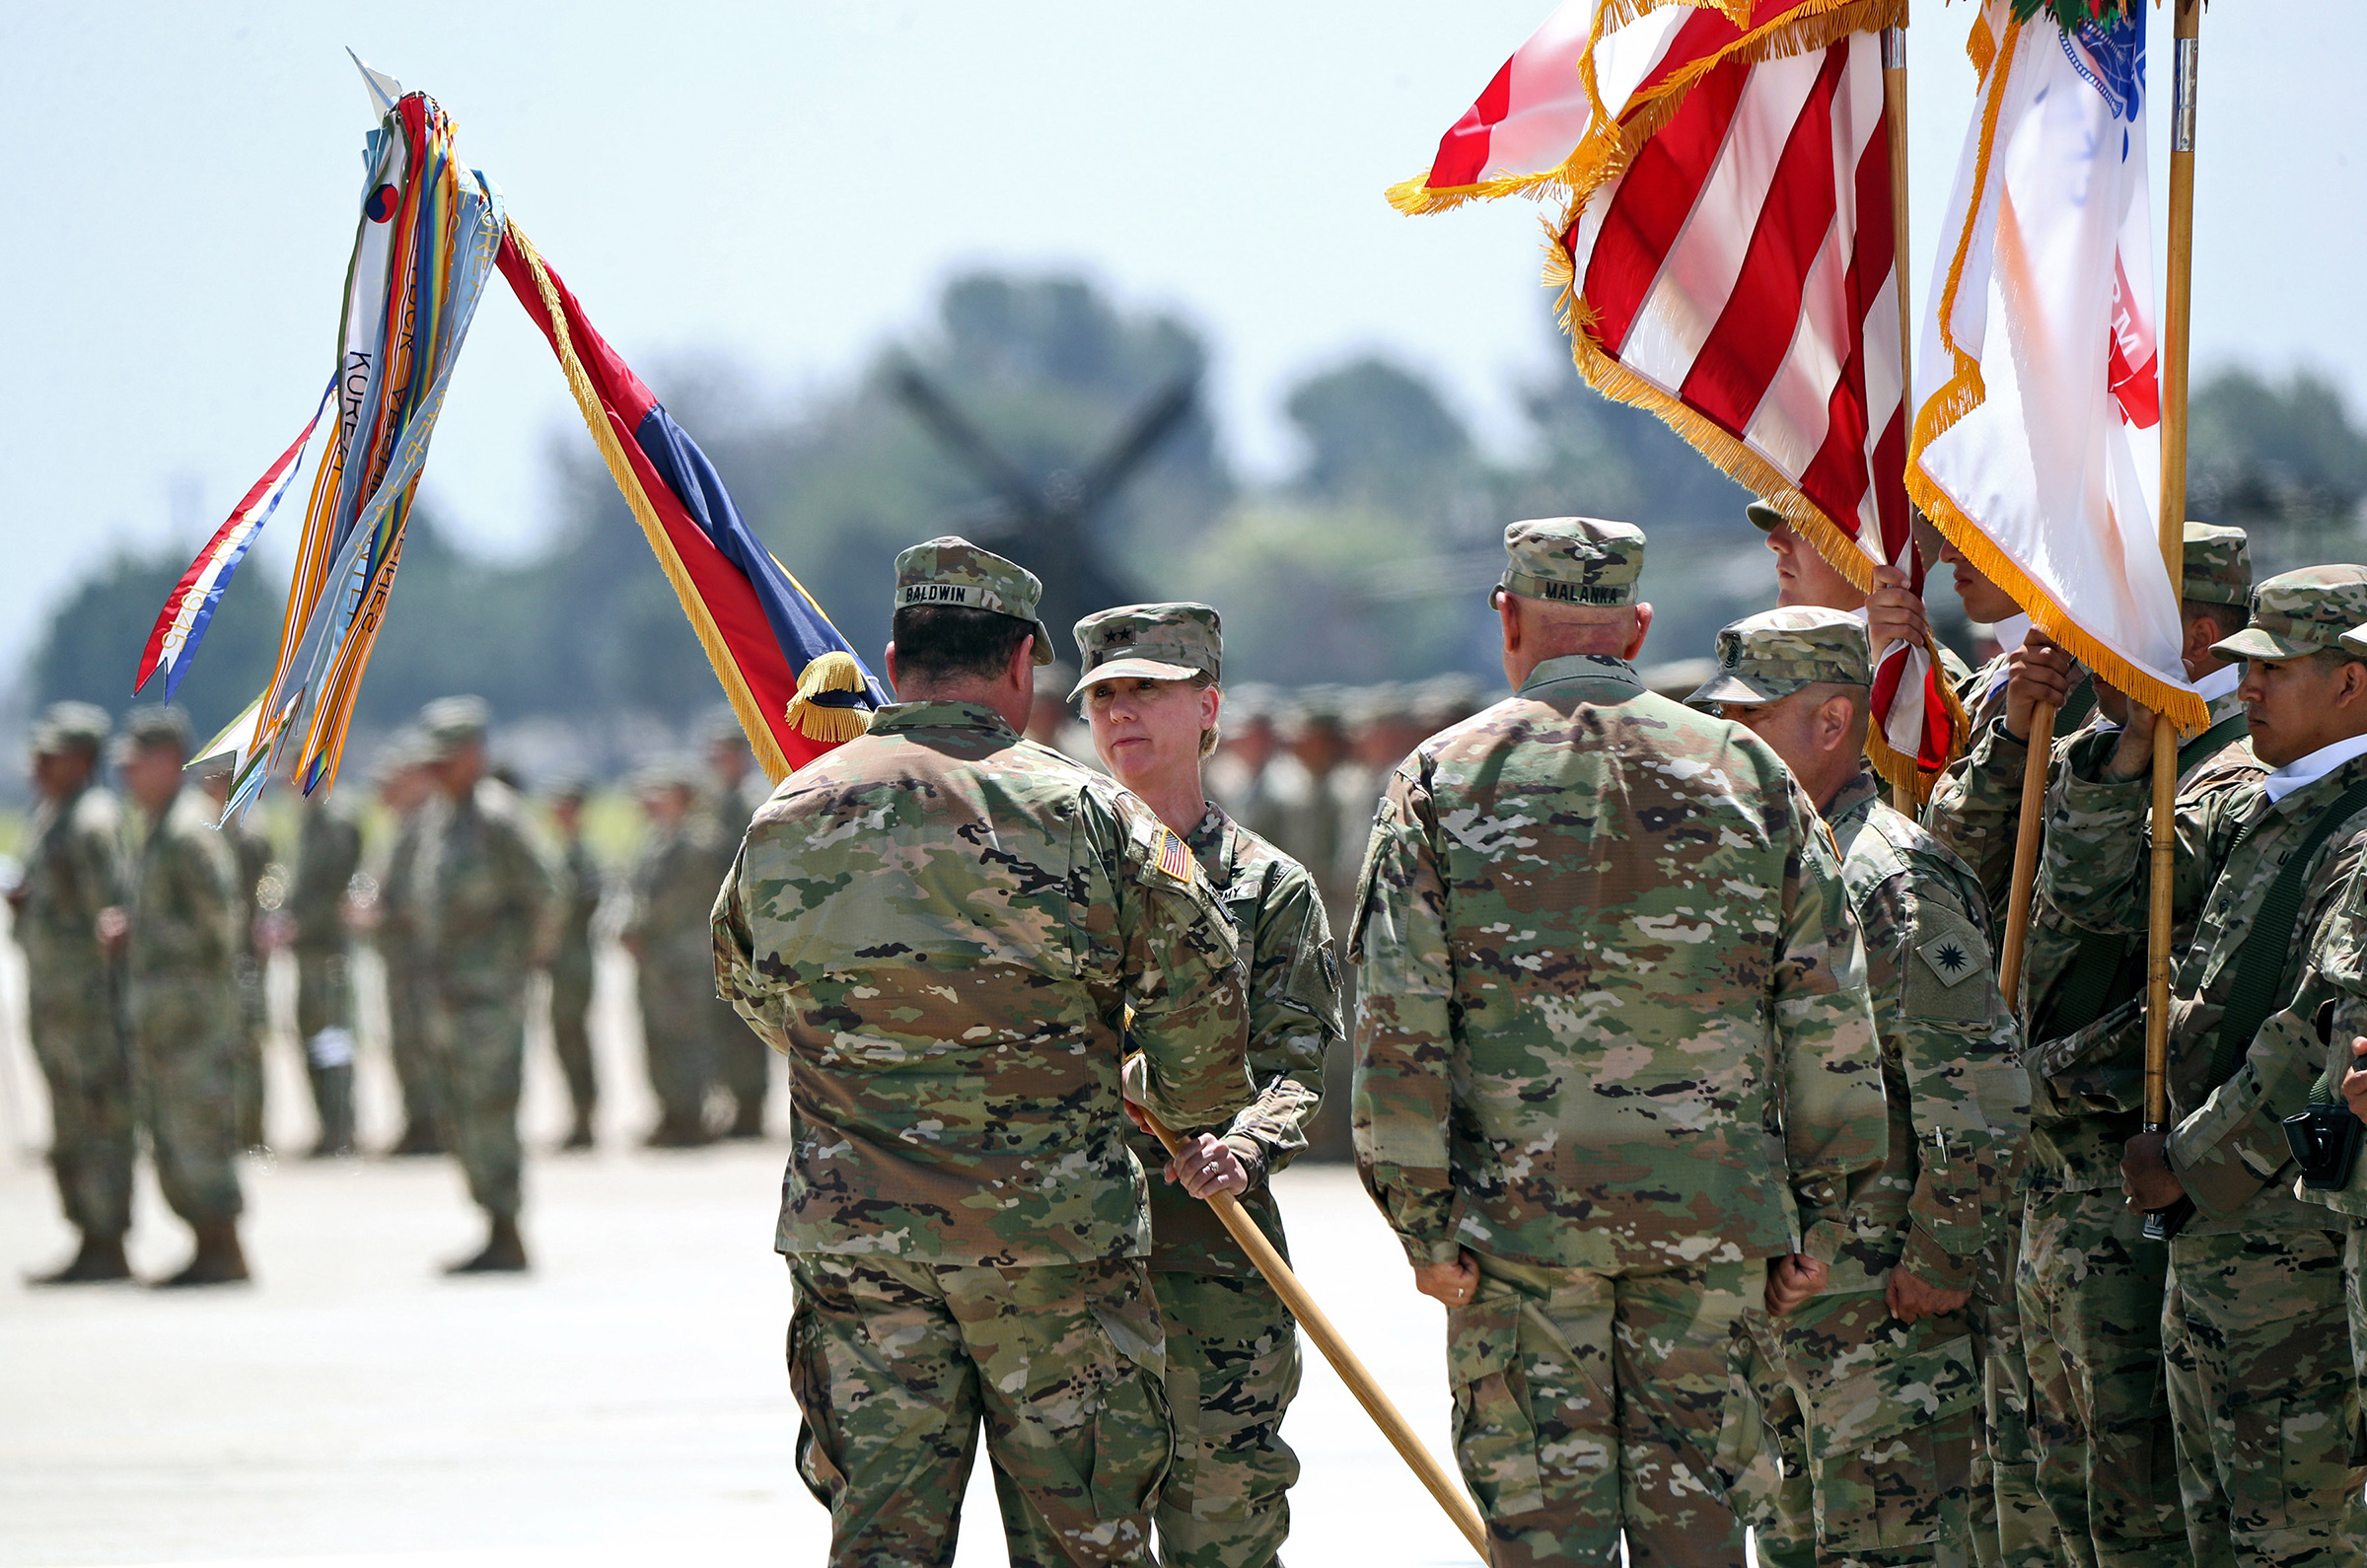 Maj. General Laura L. Yeager, second from left, is joined by Adjutant General, California Military Department Maj. Gen. David S. Baldwin, left, during Change of Command Ceremony for the 40th Infantry Division, at the Joint Forces Training Base in Los Alamitos, on June 29, 2019.